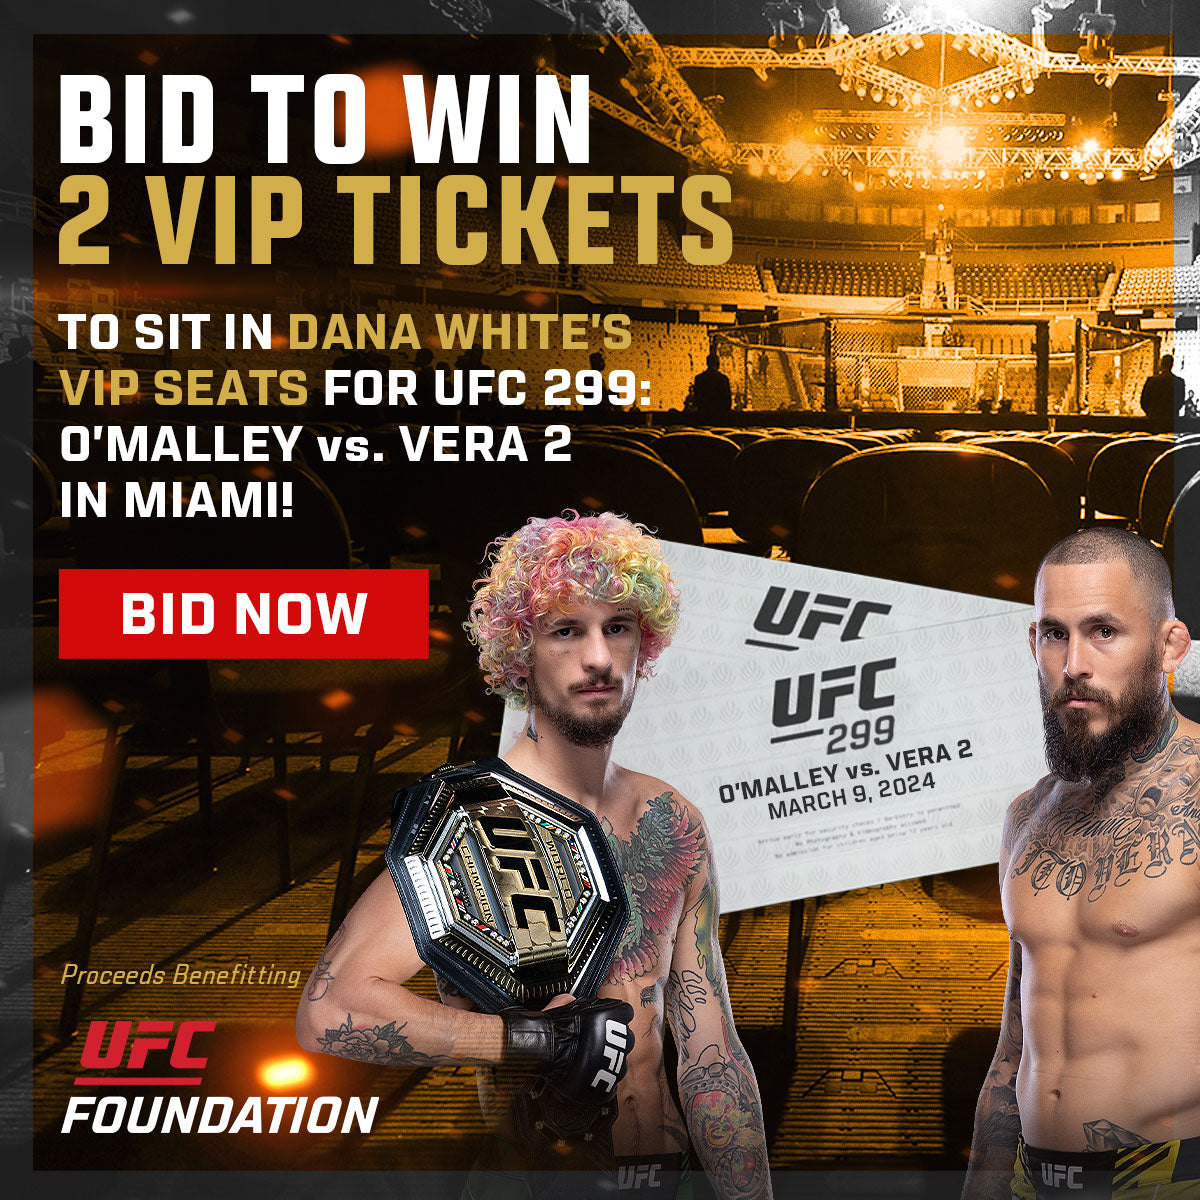 UFC 299: O'Malley vs. Vera 2 Dana White VIP Section Tickets with Signed Gloves & Poster – UFC Foundation